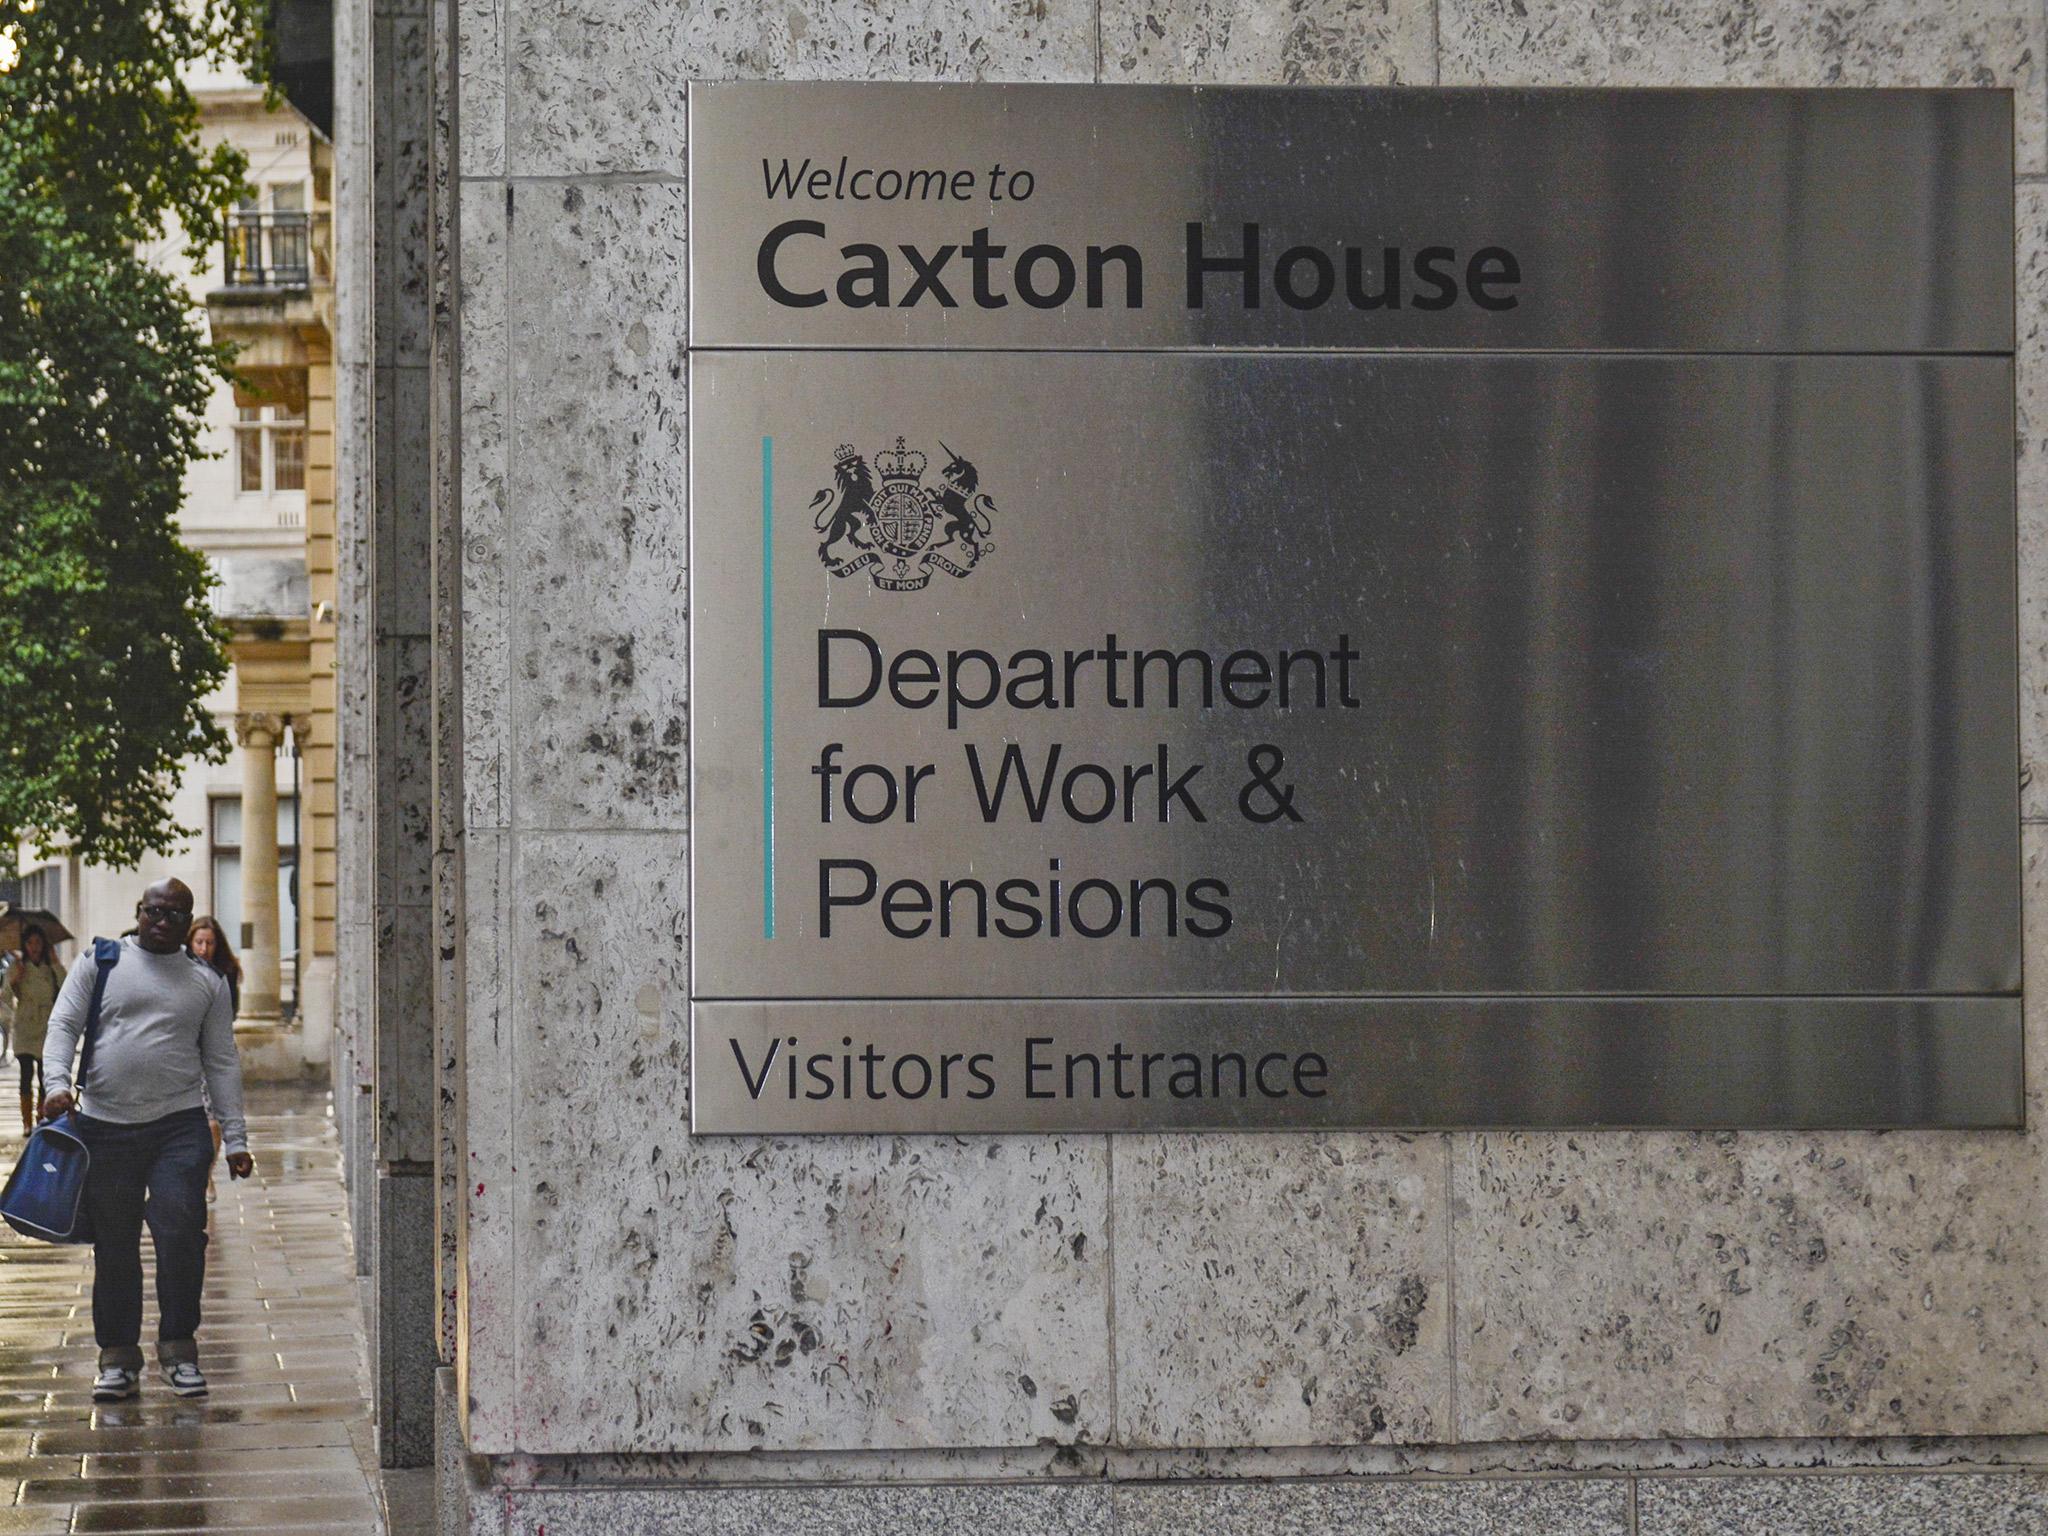 The DWP reportedly penalised a disabled woman after she sought work but had to resign due to ill health